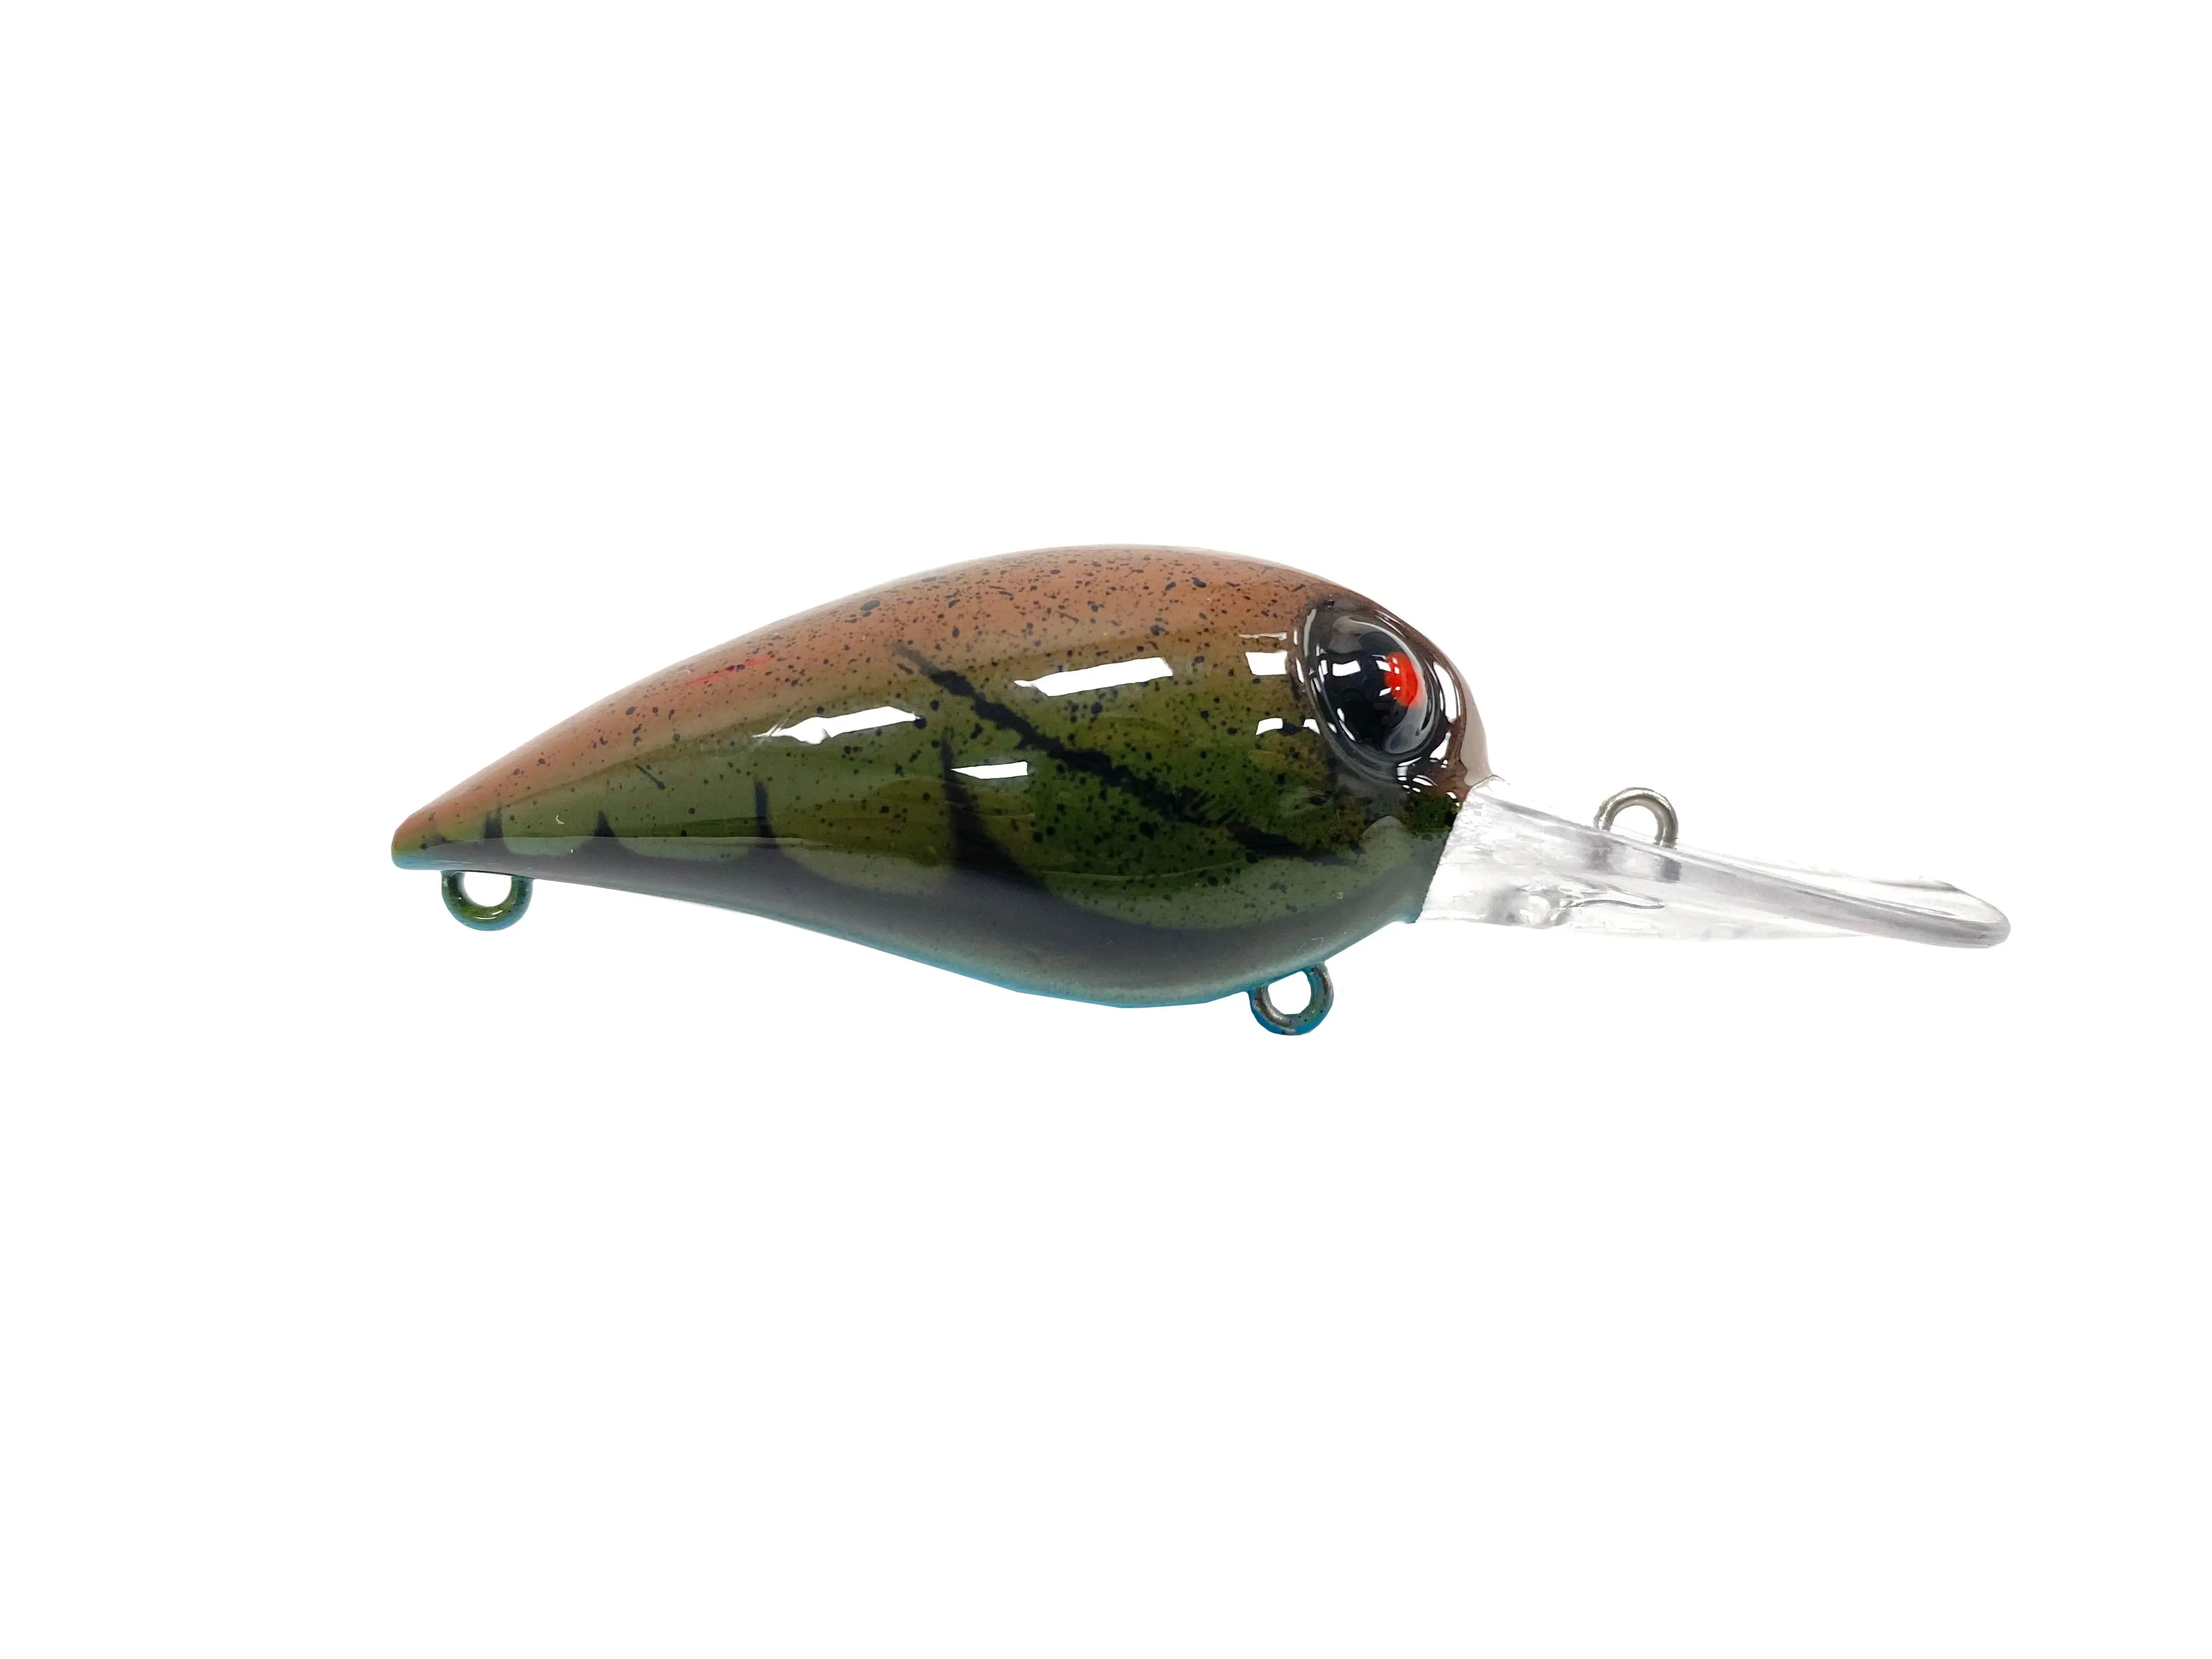 Handcrafted Wooden Fishing Jerkbaits with Real Fish Skin